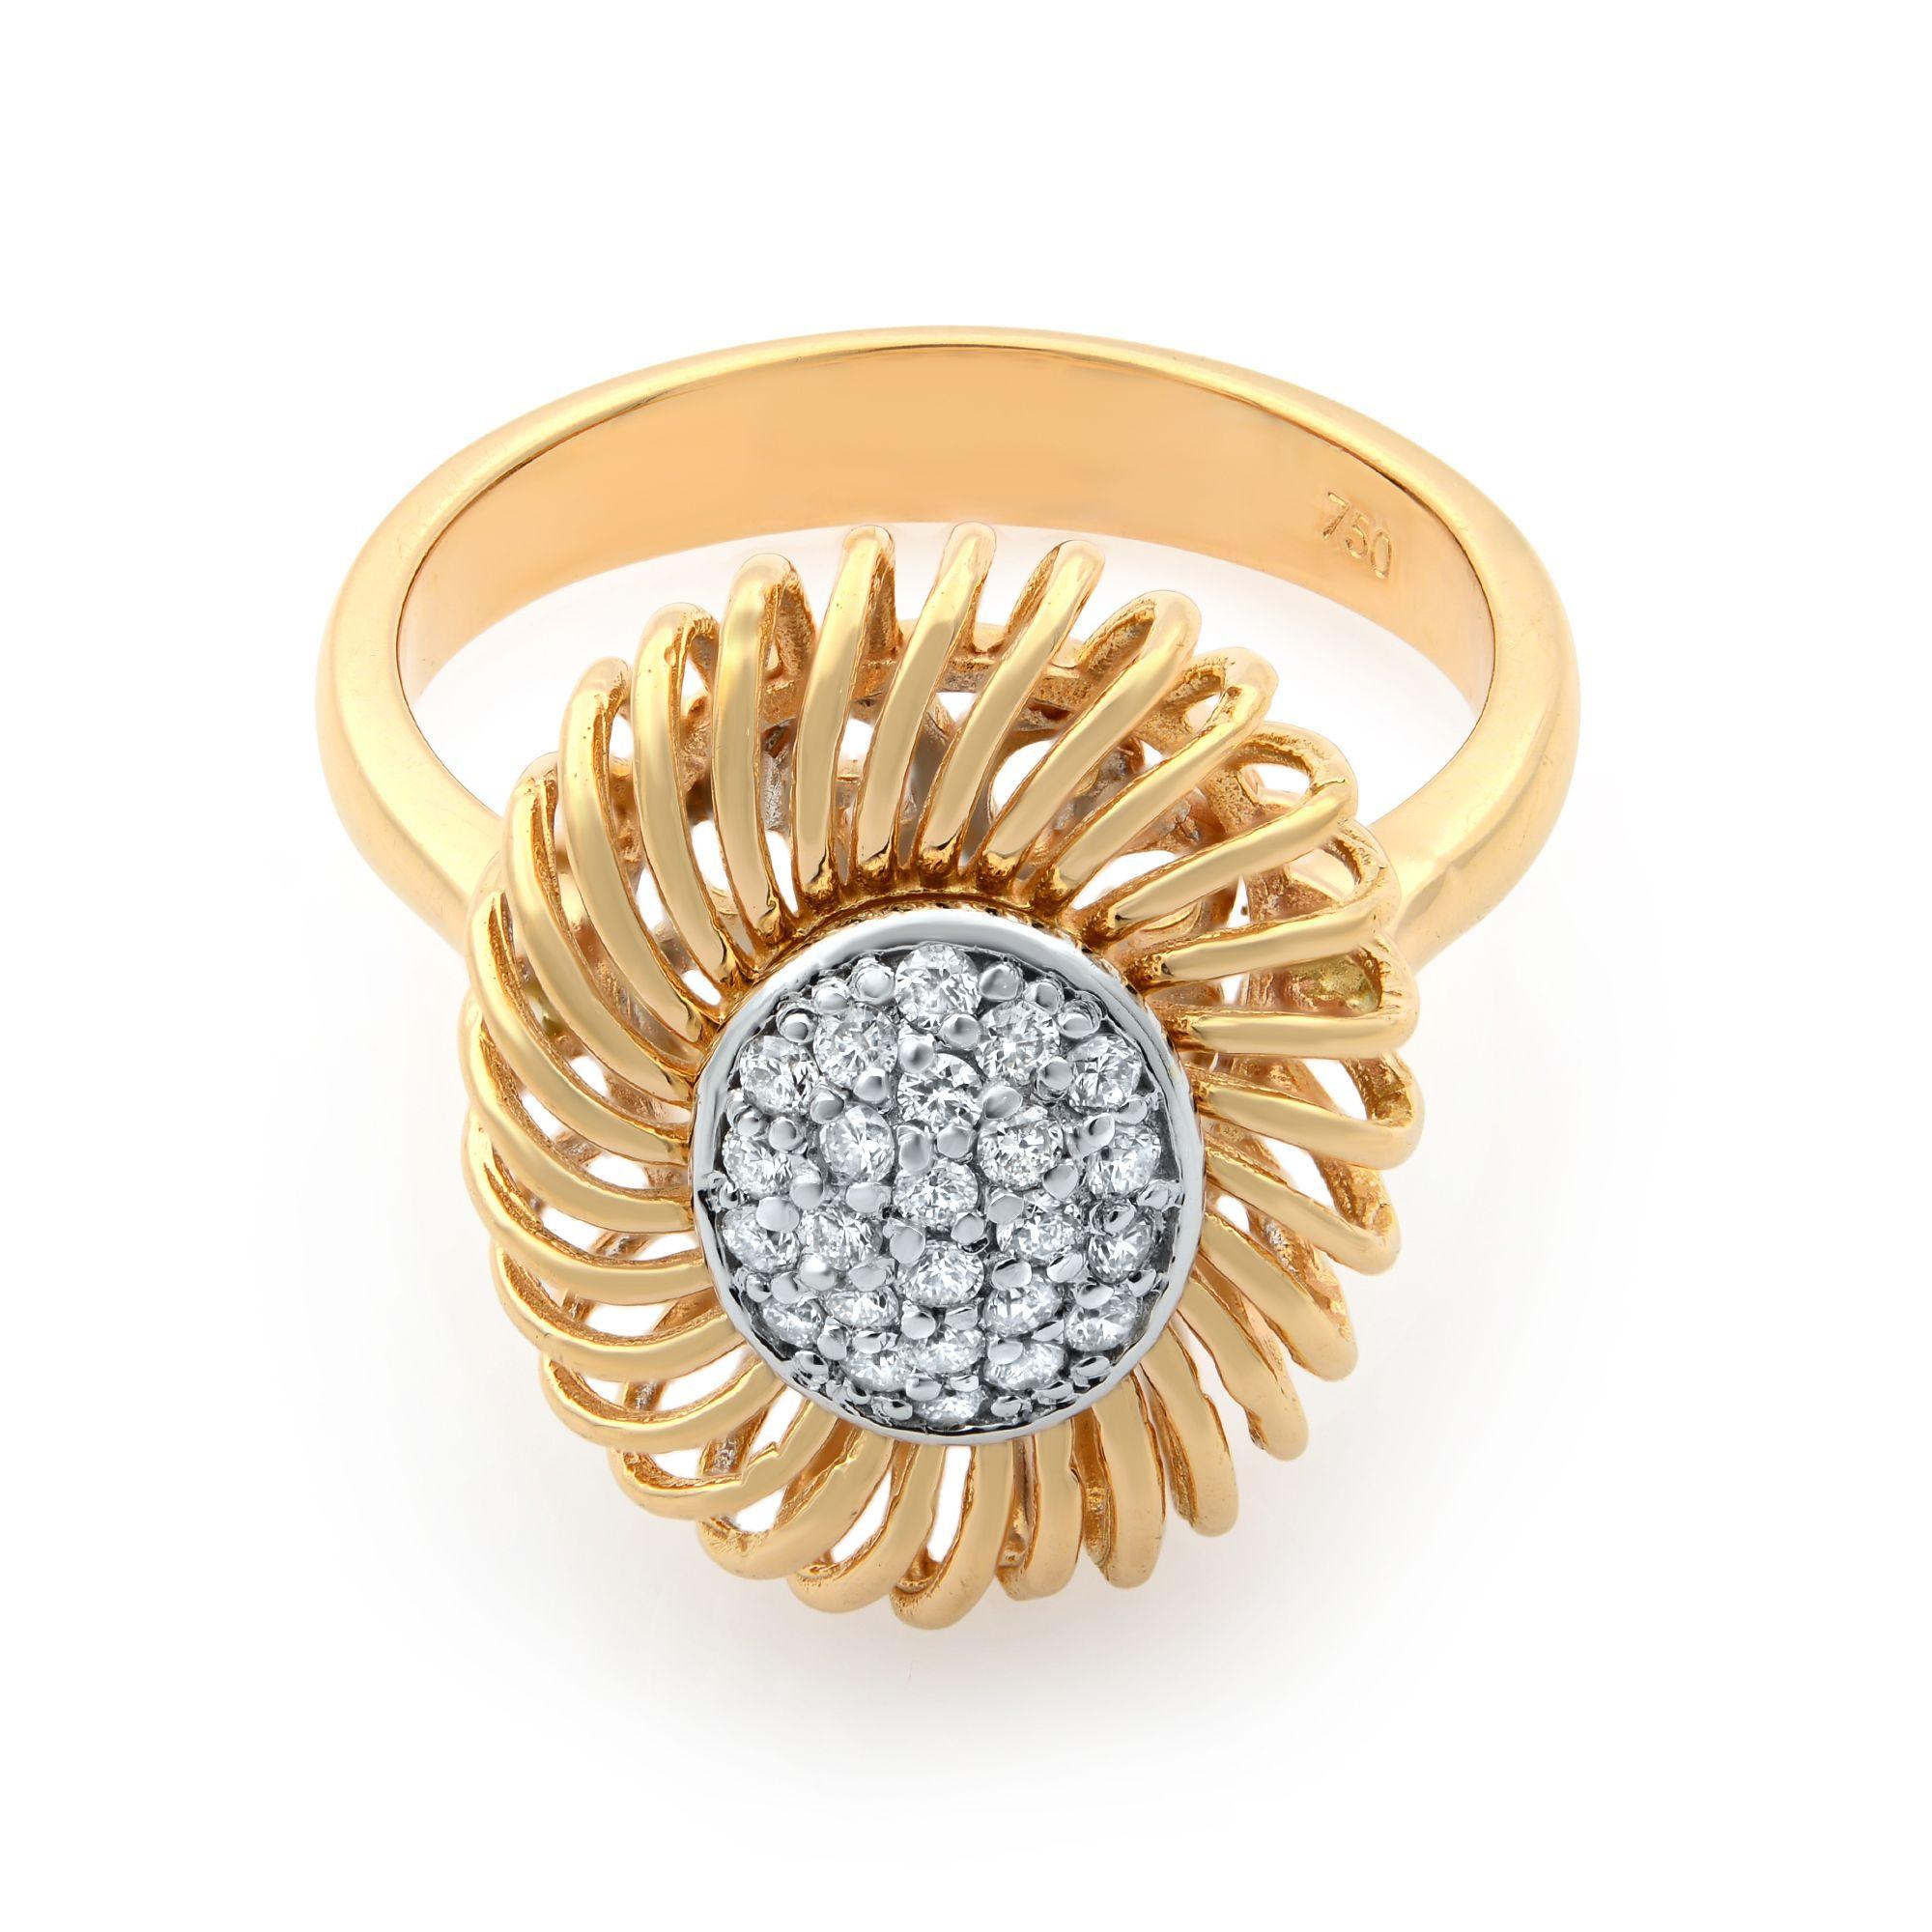 A unique cocktail ring crafted in 18k rose gold and set with 0.15cts of round cut diamonds. The halo is made in a spiral shape. Ring size 6.75. Comes in our jewelry presentation box. 